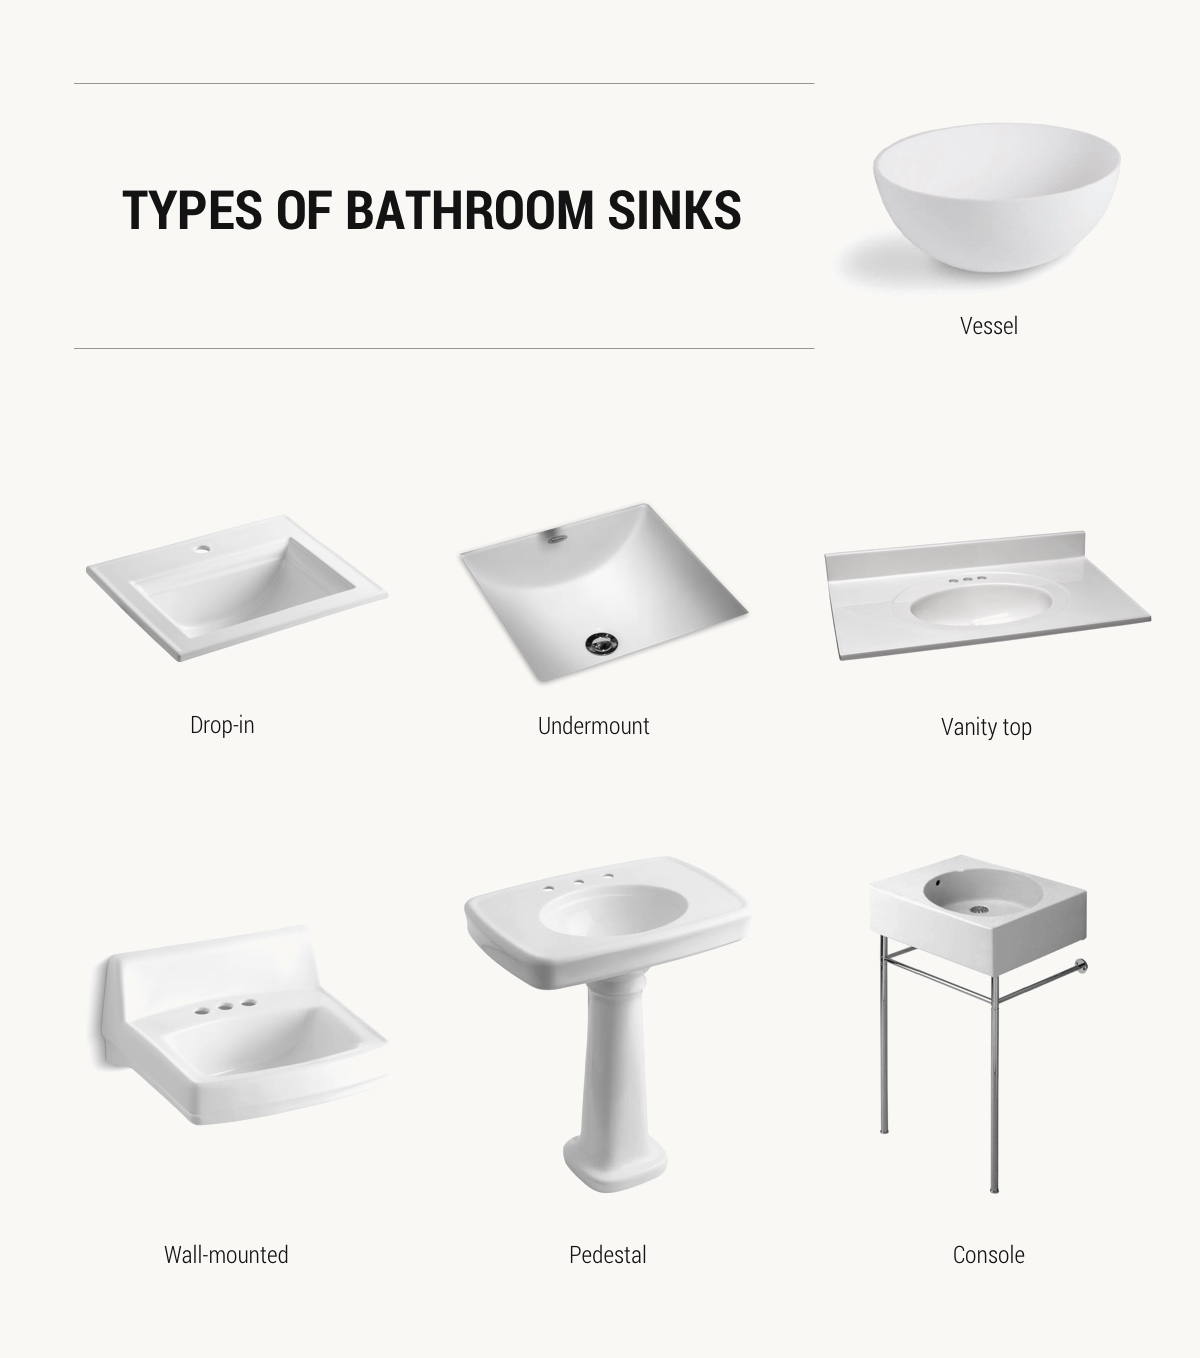 51 Bathroom Sinks That Are Overflowing, Small Vanity To Replace Pedestal Sink